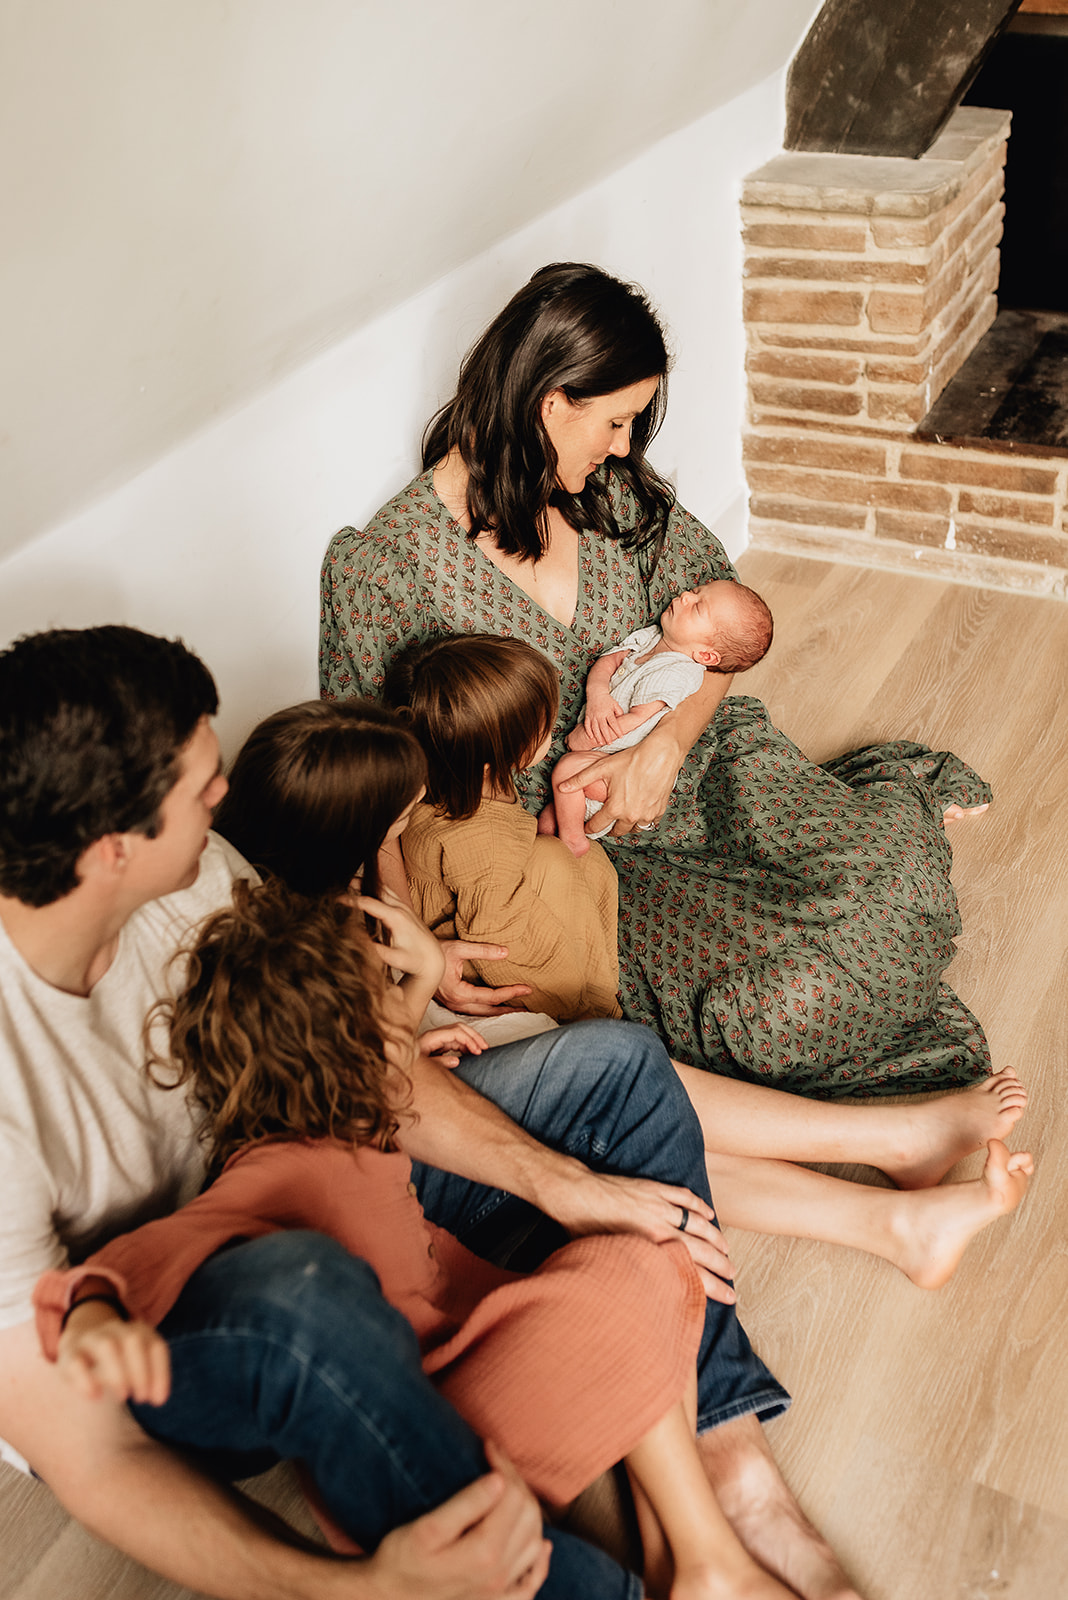 A mother in a green dress lits on the floor next to a fireplace while Dad and their three daughters sit next to her looking in